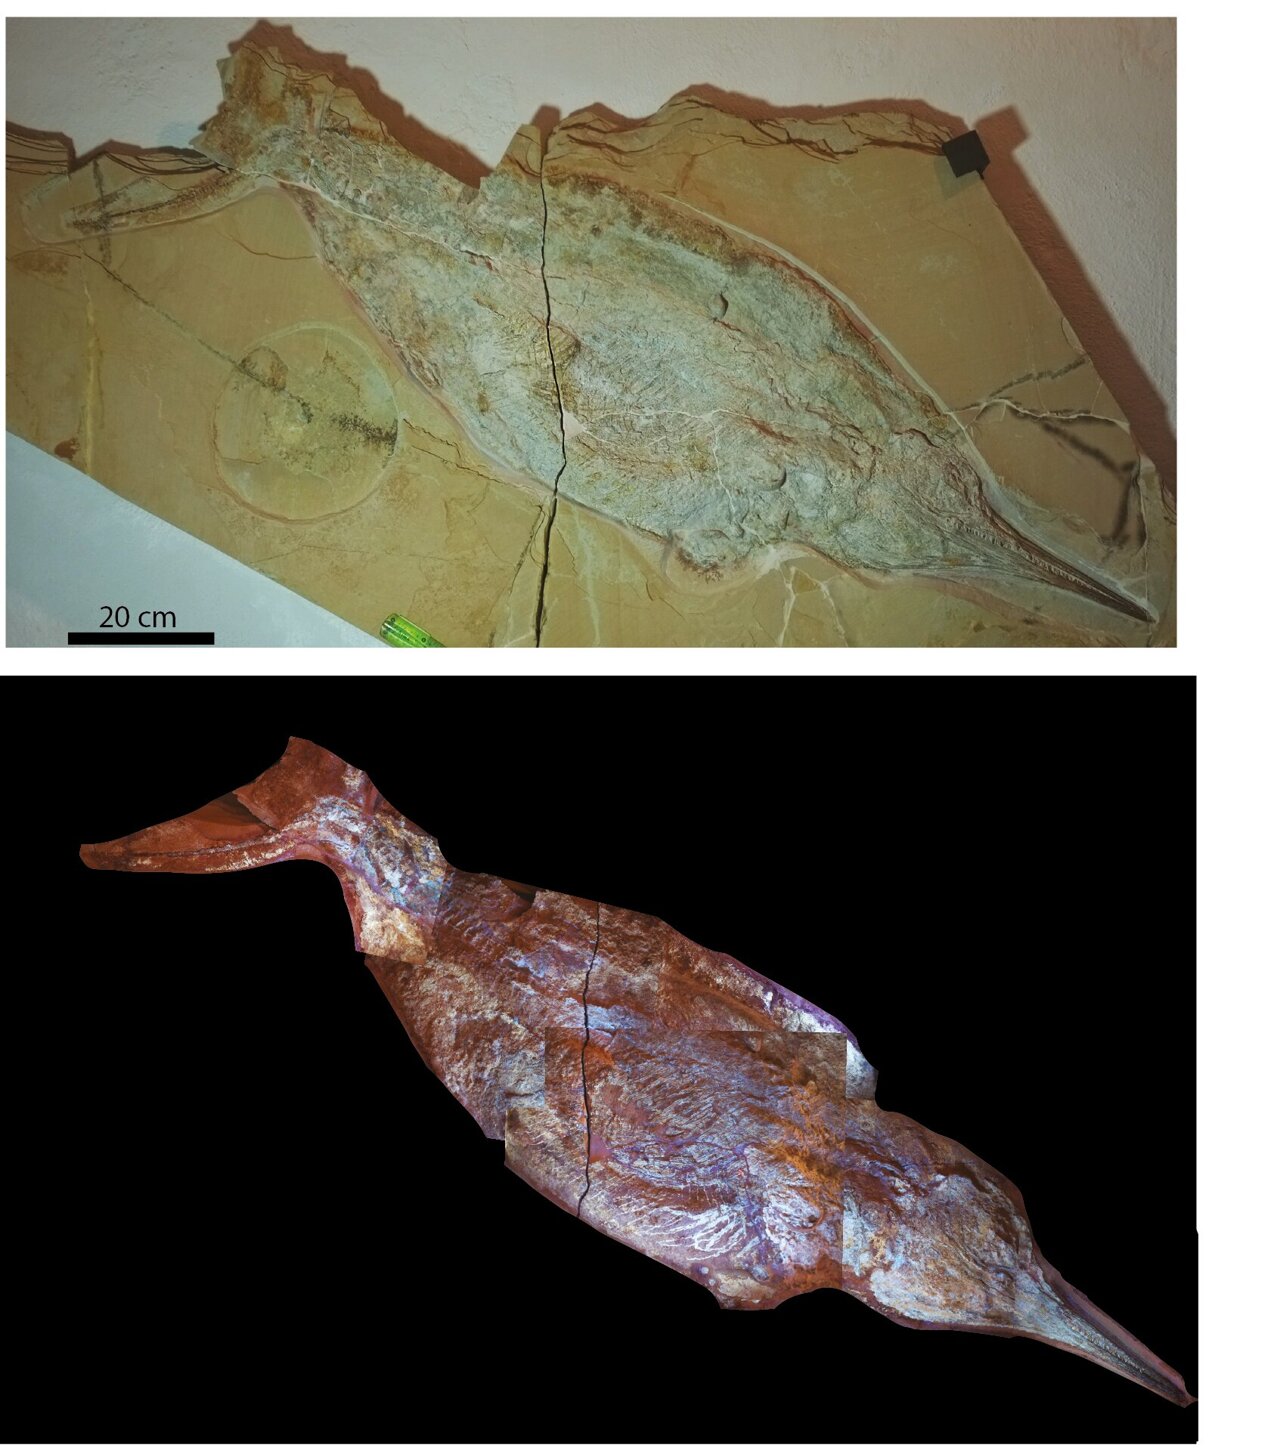 Fish-like marine reptile buried in its own blubber in southern Germany 150  million years ago